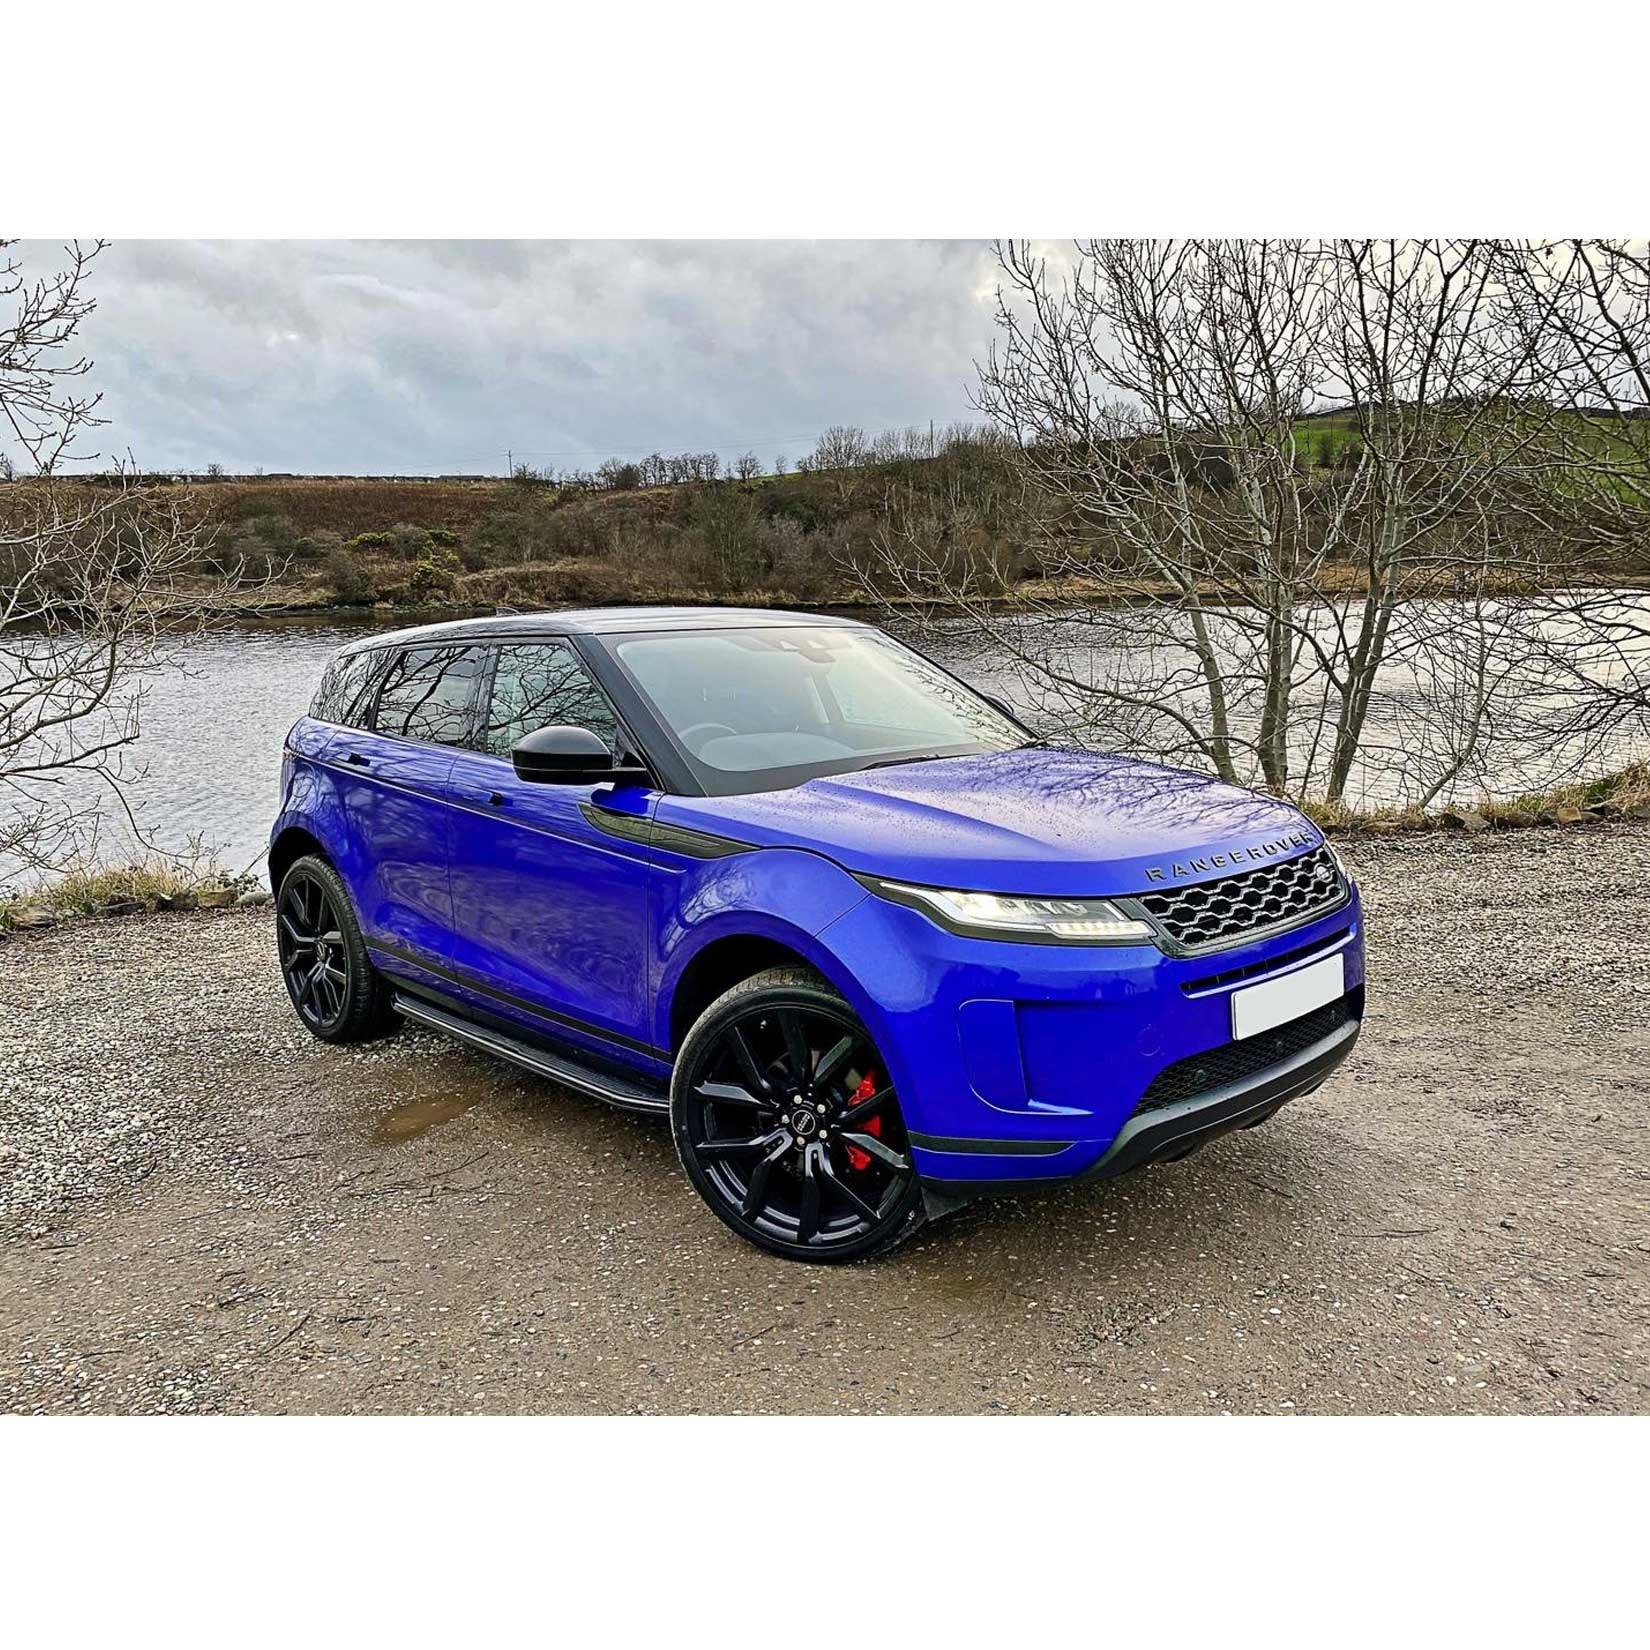 RANGE ROVER EVOQUE 2018 ON OE STYLE RUNNING BOARDS - SIDE STEPS - IN BLACK - PAIR - Storm Xccessories2